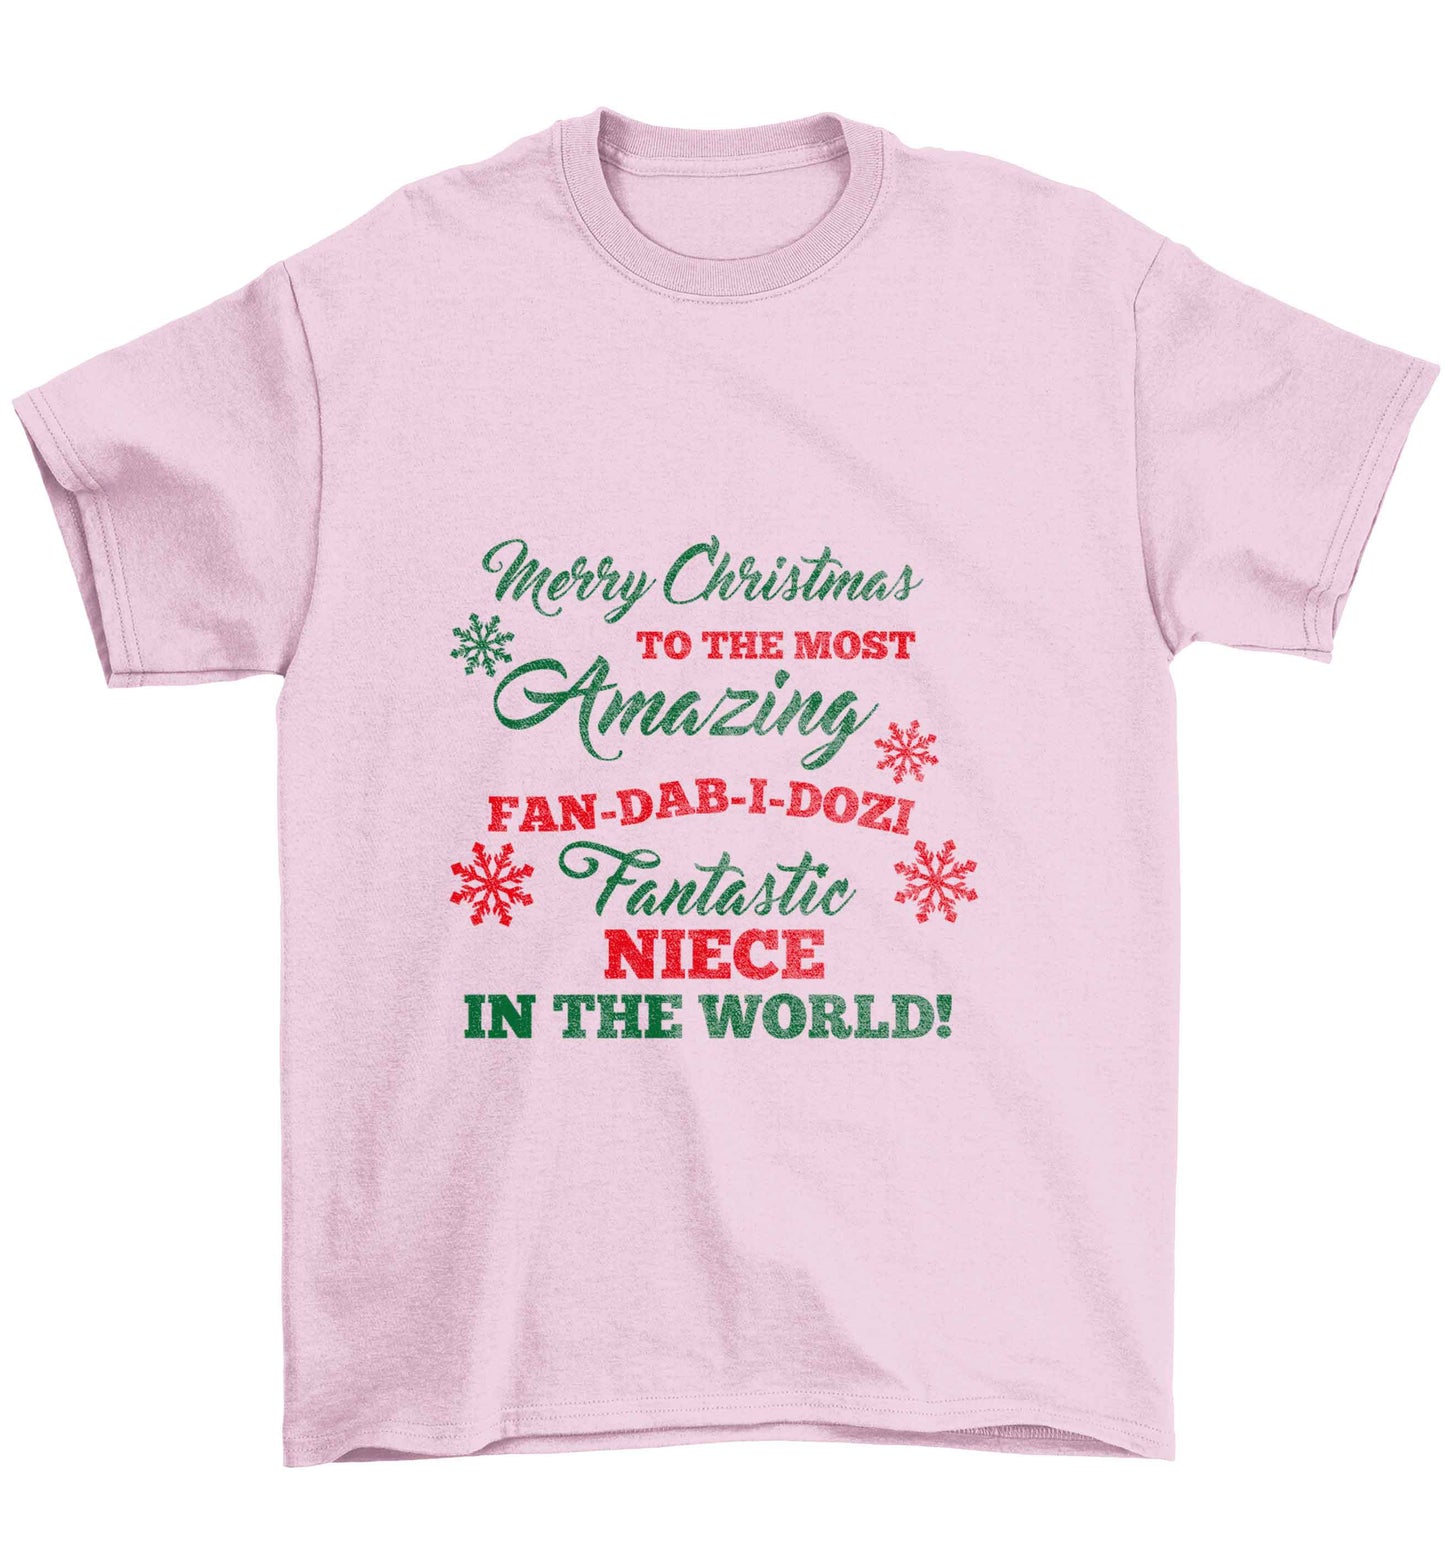 Merry Christmas to the most amazing fan-dab-i-dozi fantasic Niece in the world Children's light pink Tshirt 12-13 Years